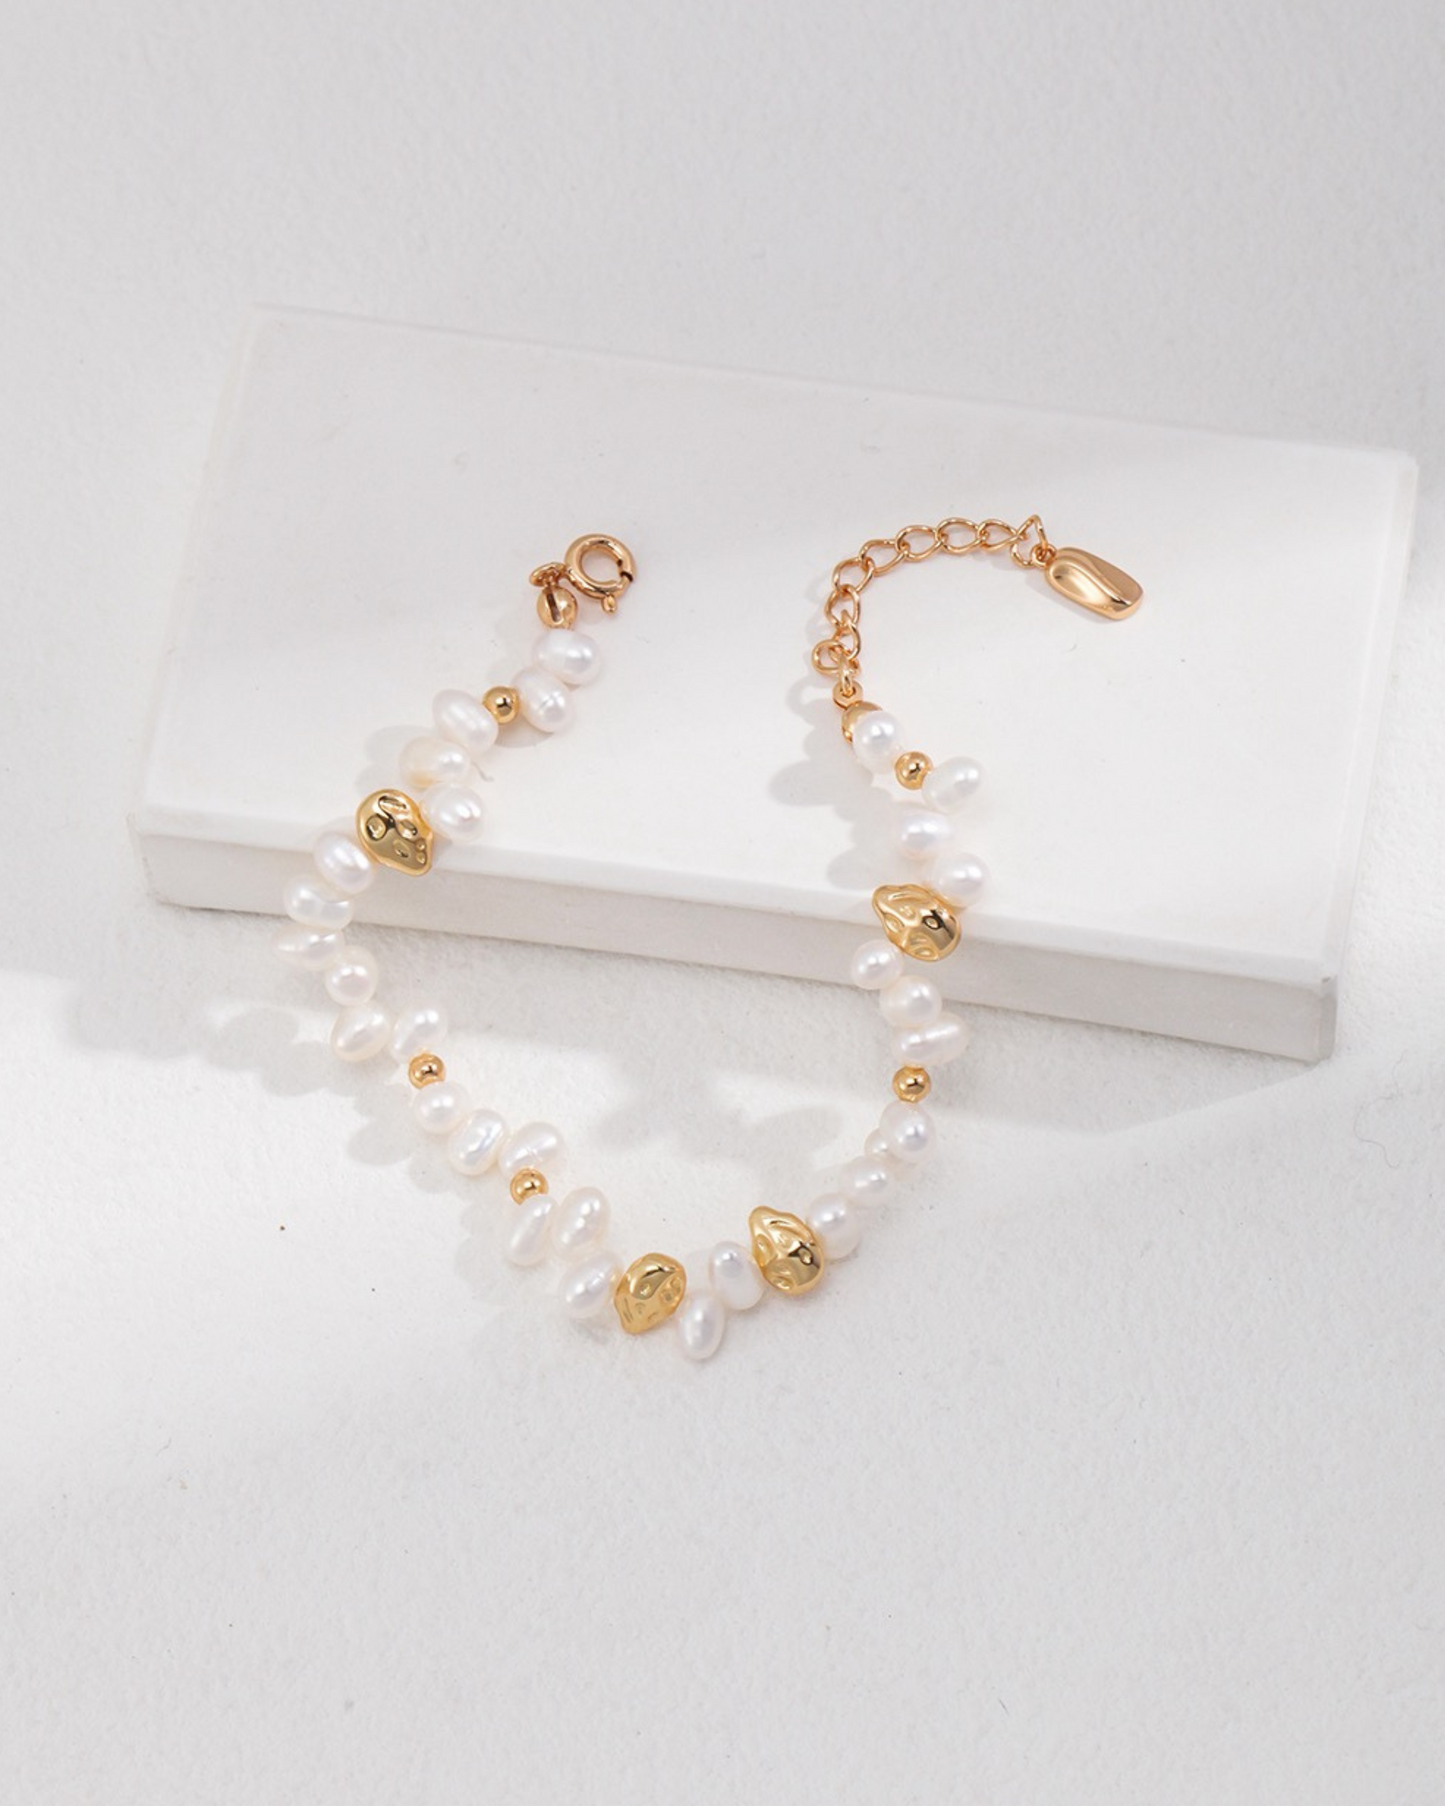 Gold Beads and Pearls Bracelet